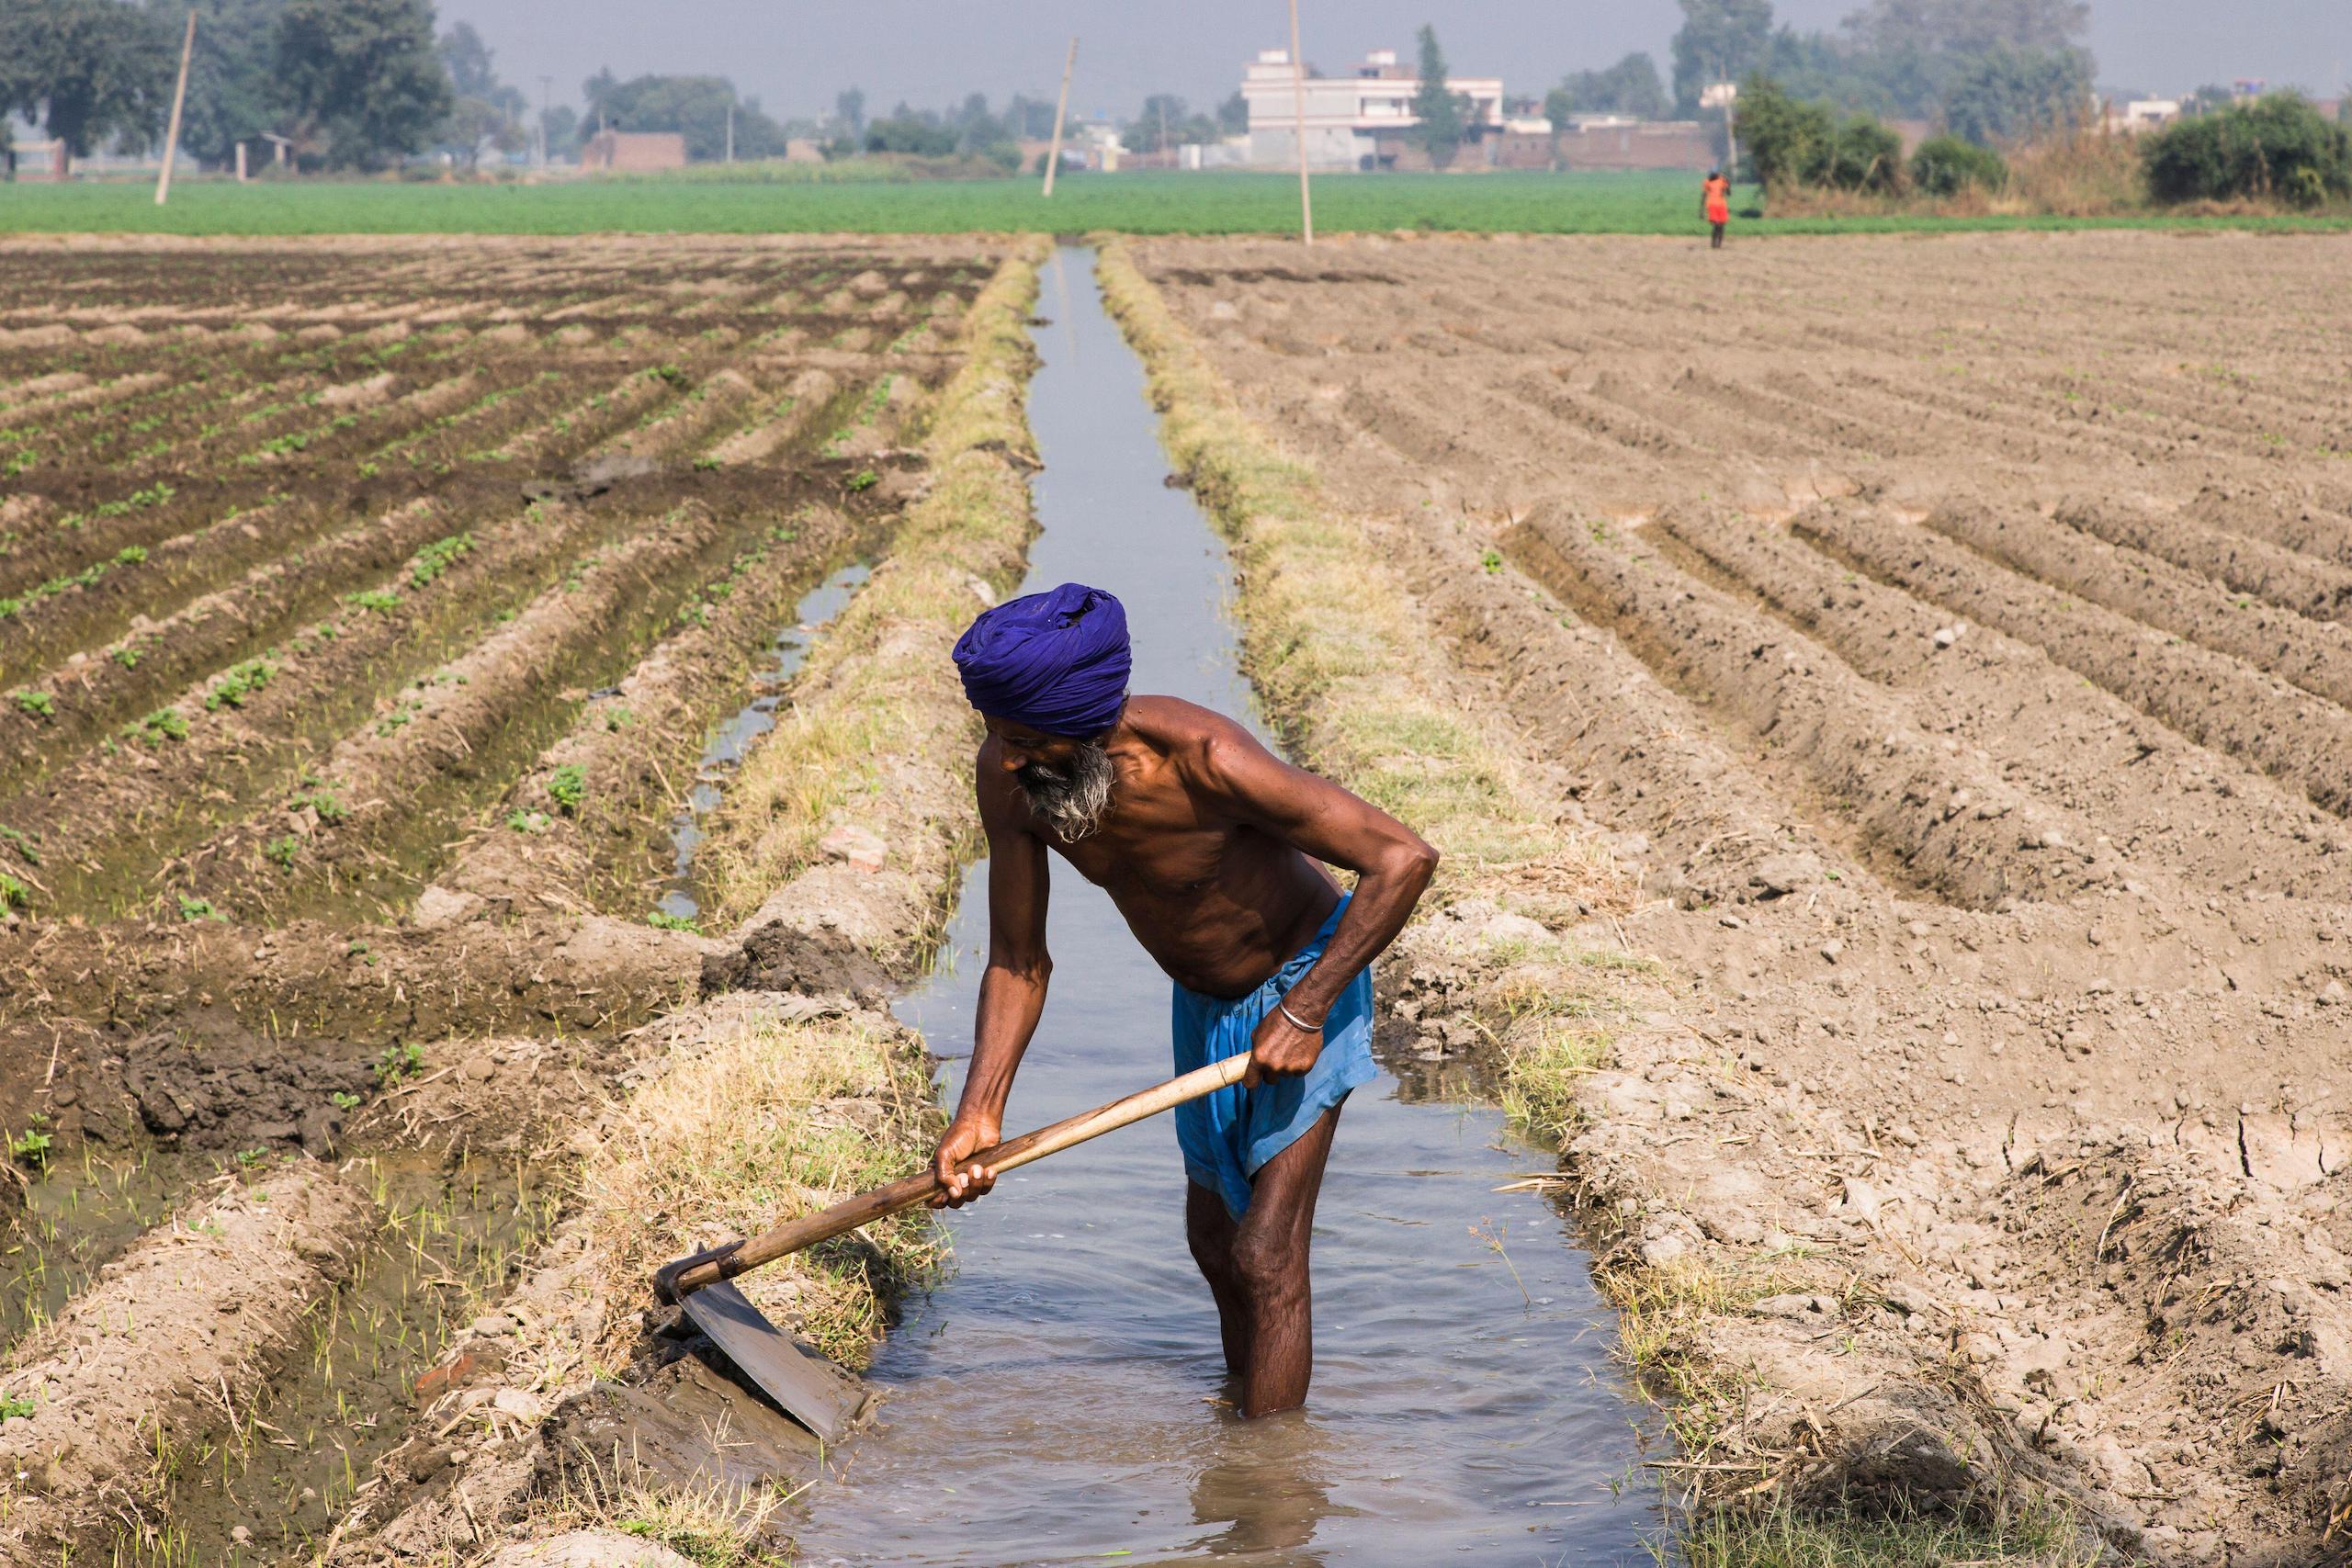 <p>A man repairs a canal that irrigates fields in Punjab, one of India’s main breadbaskets. Over the past 60 years, the area of land irrigated by canals has fallen from 58.4% to 28%; farmers increasingly rely on tubewells, which deplete groundwater reserves. (Image: Suzuki Kaku / Alamy)</p>